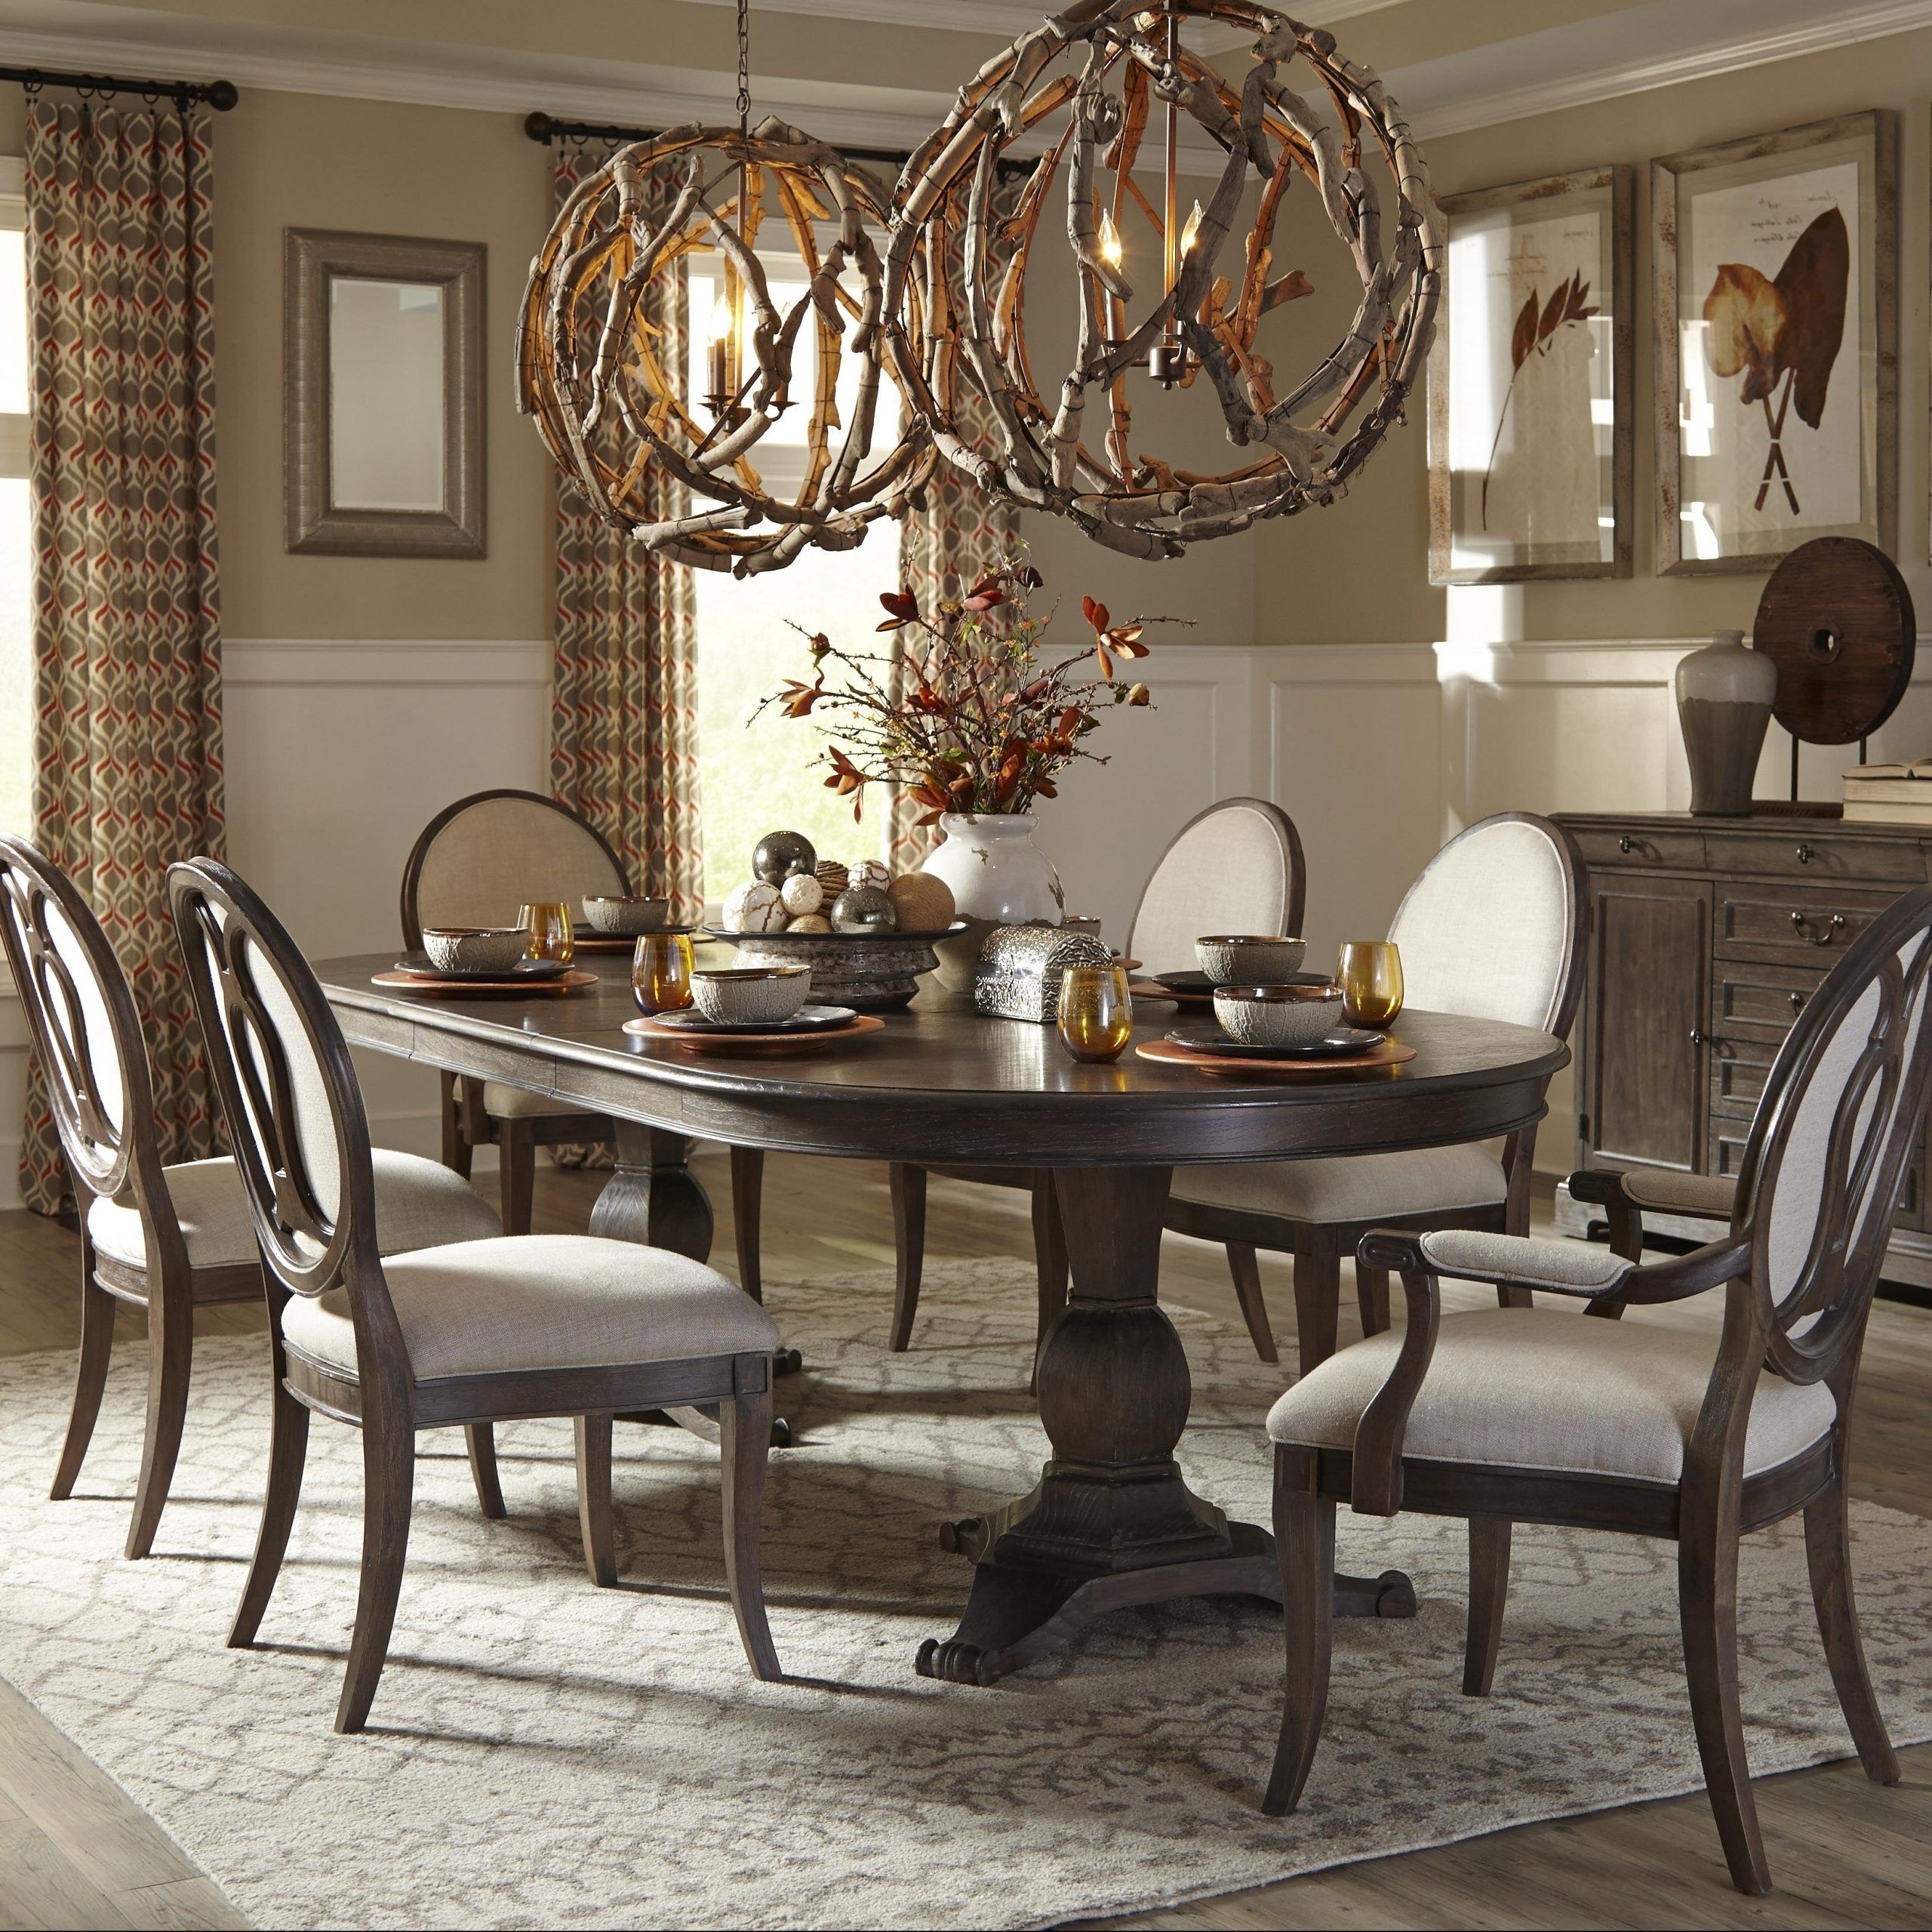 Most Recently Released 50+ Double Pedestal Dining Table You'll Love In 2020 Regarding Transitional 4 Seating Square Casual Dining Tables (View 29 of 30)